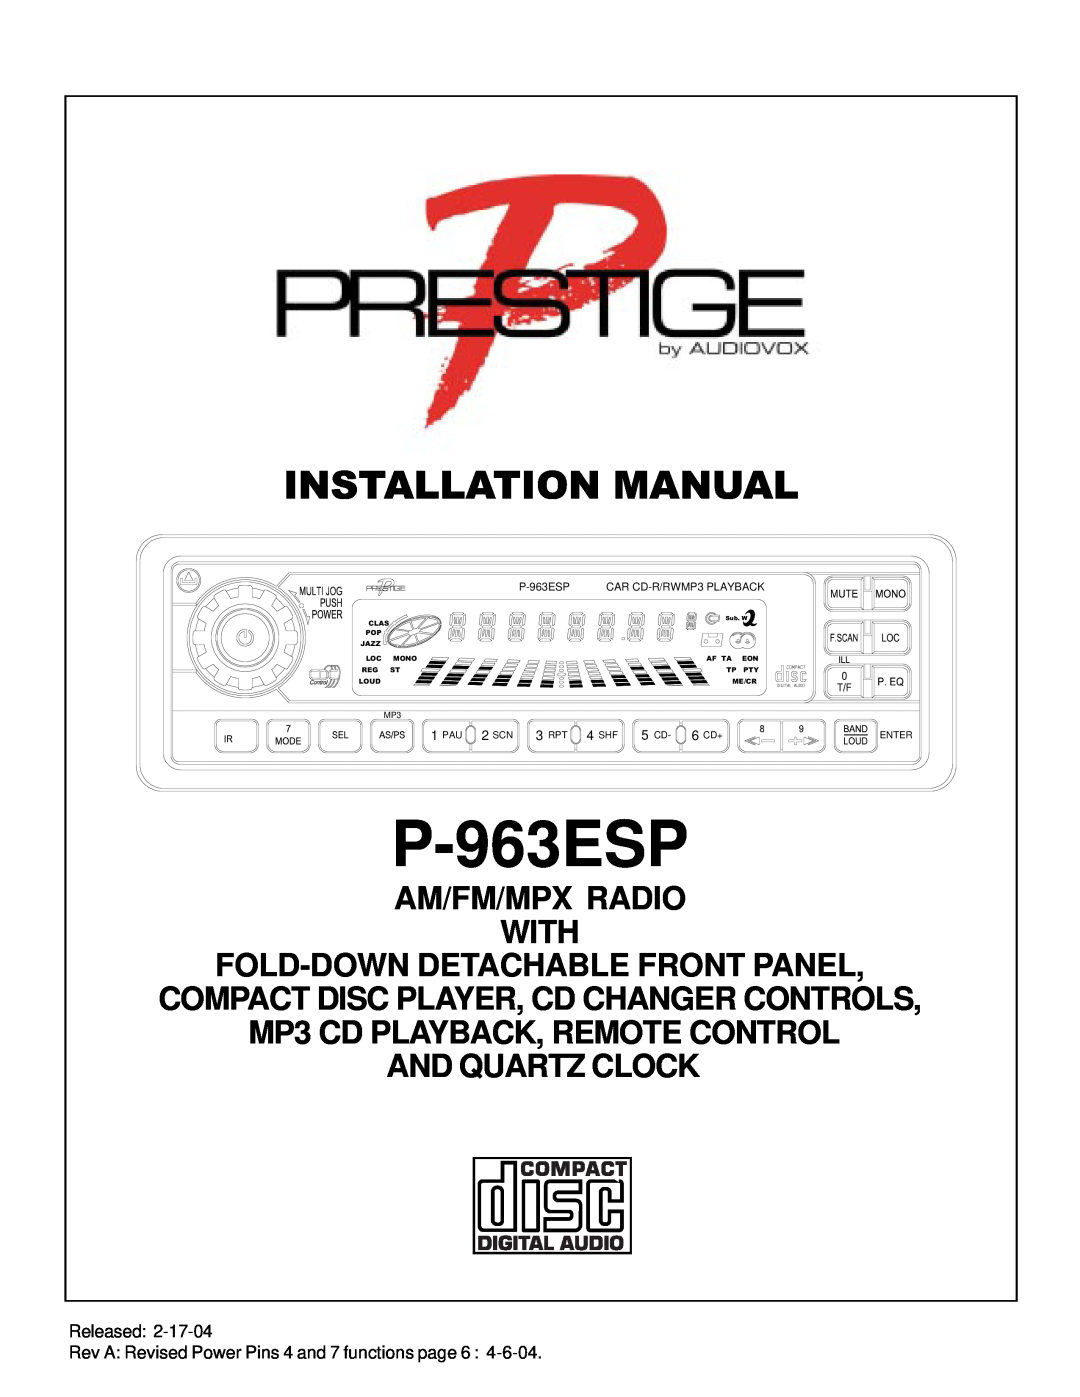 Audiovox P-963ESP installation manual Released, Installation Manual, Am/Fm/Mpx Radio With, Fold-Downdetachable Front Panel 